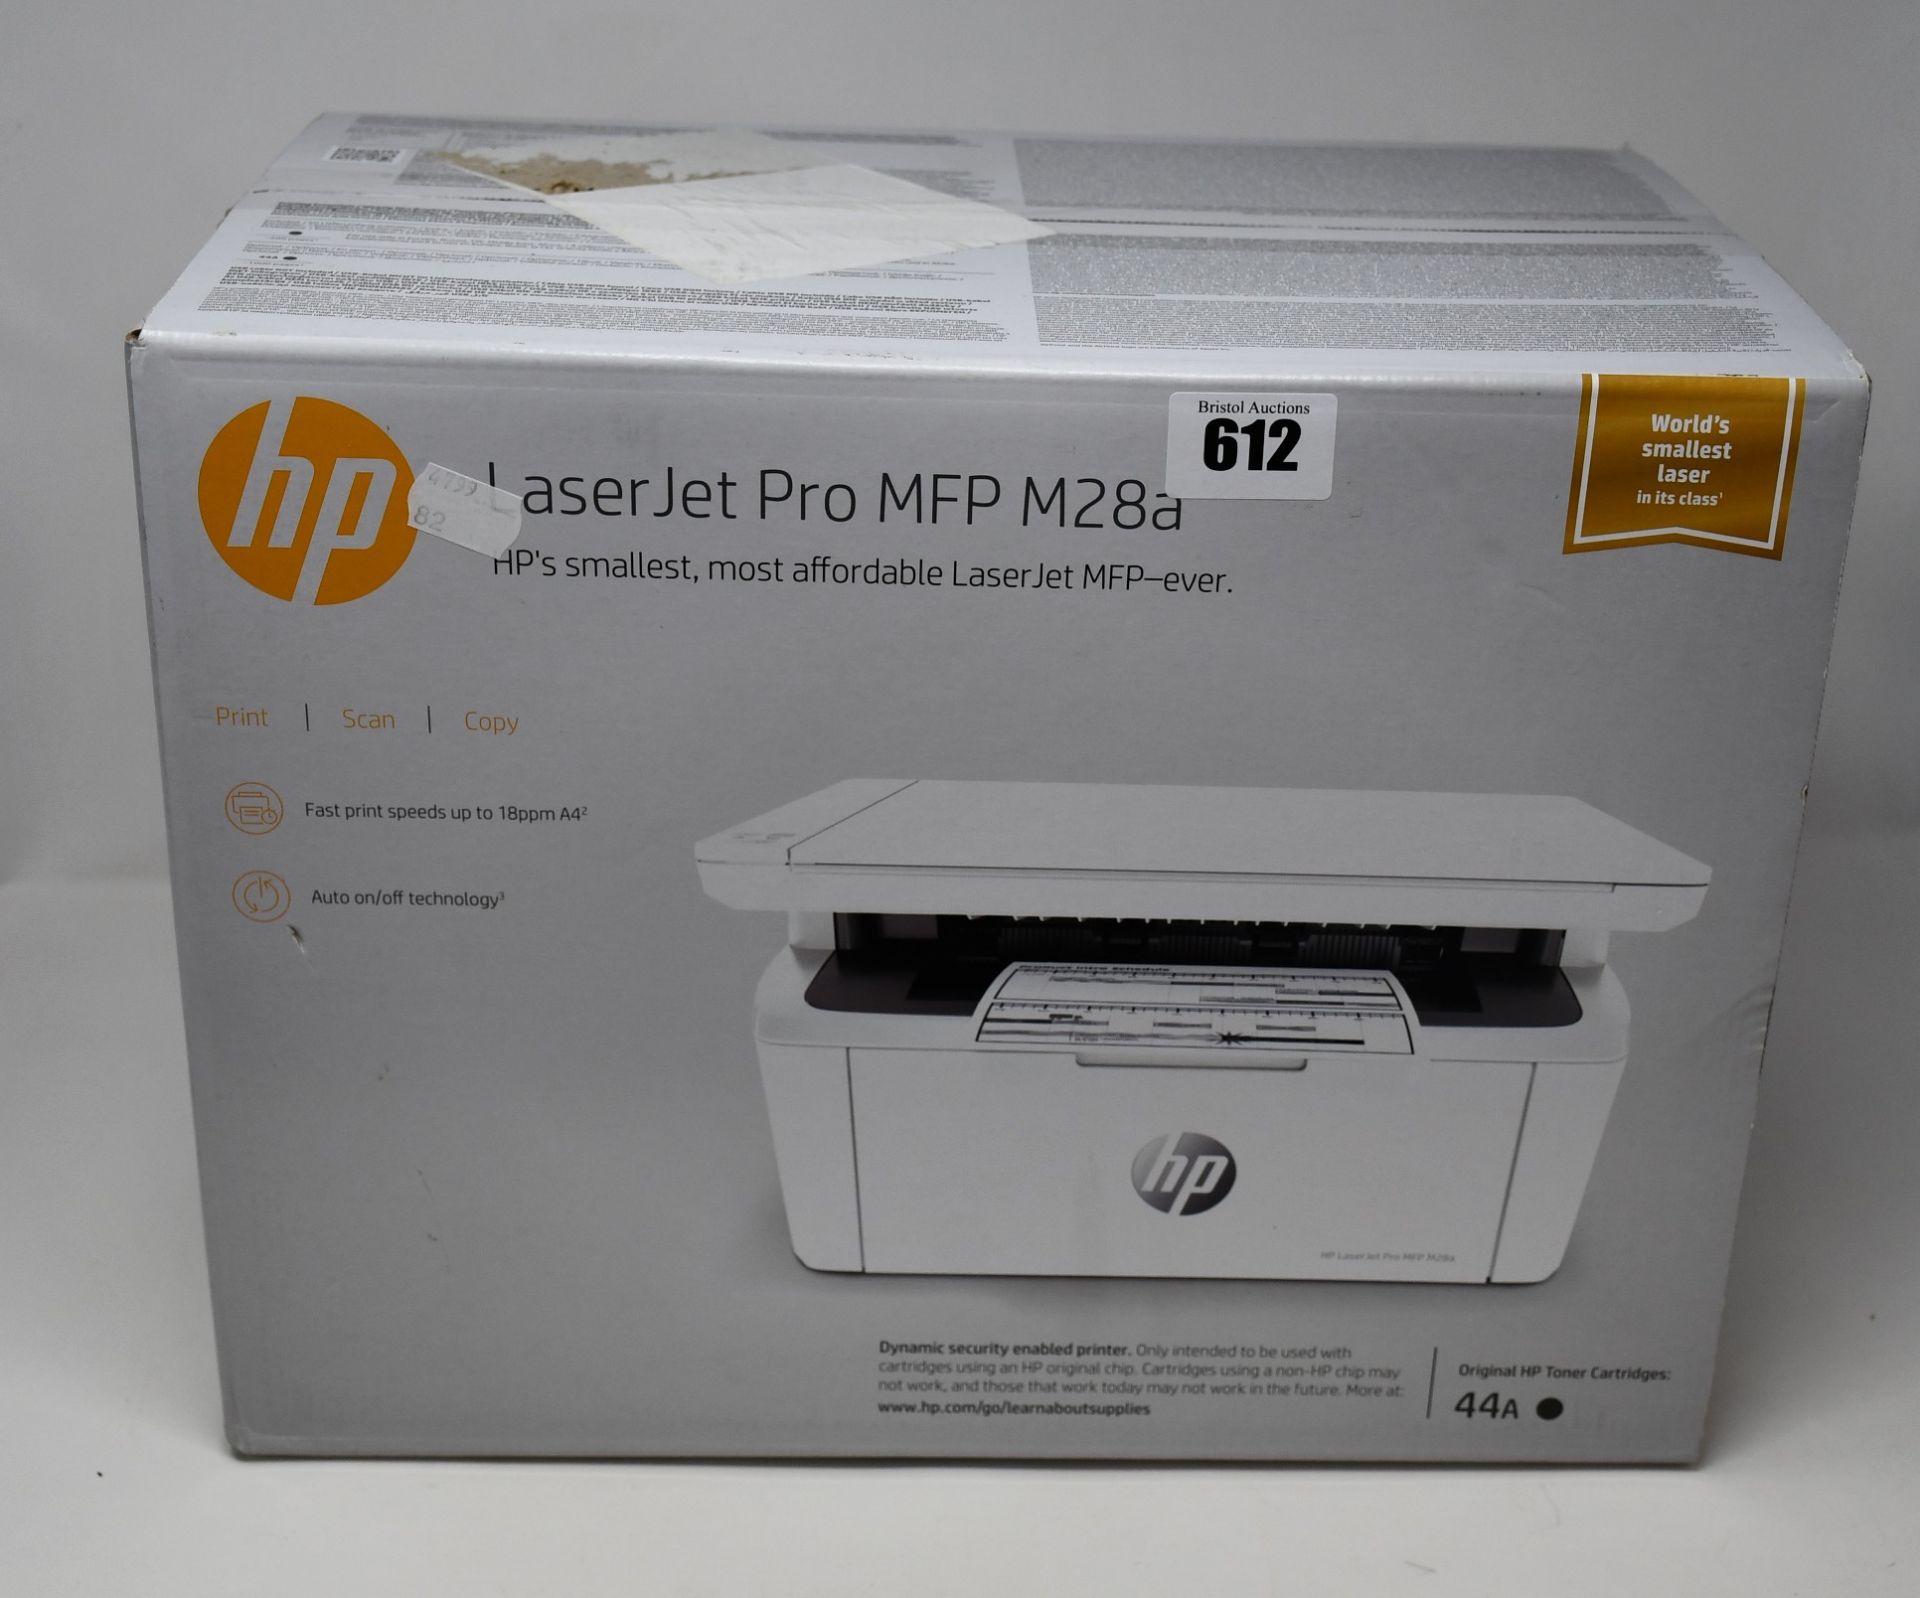 One boxed as new HP Laser Jet Pro MFP M28a.